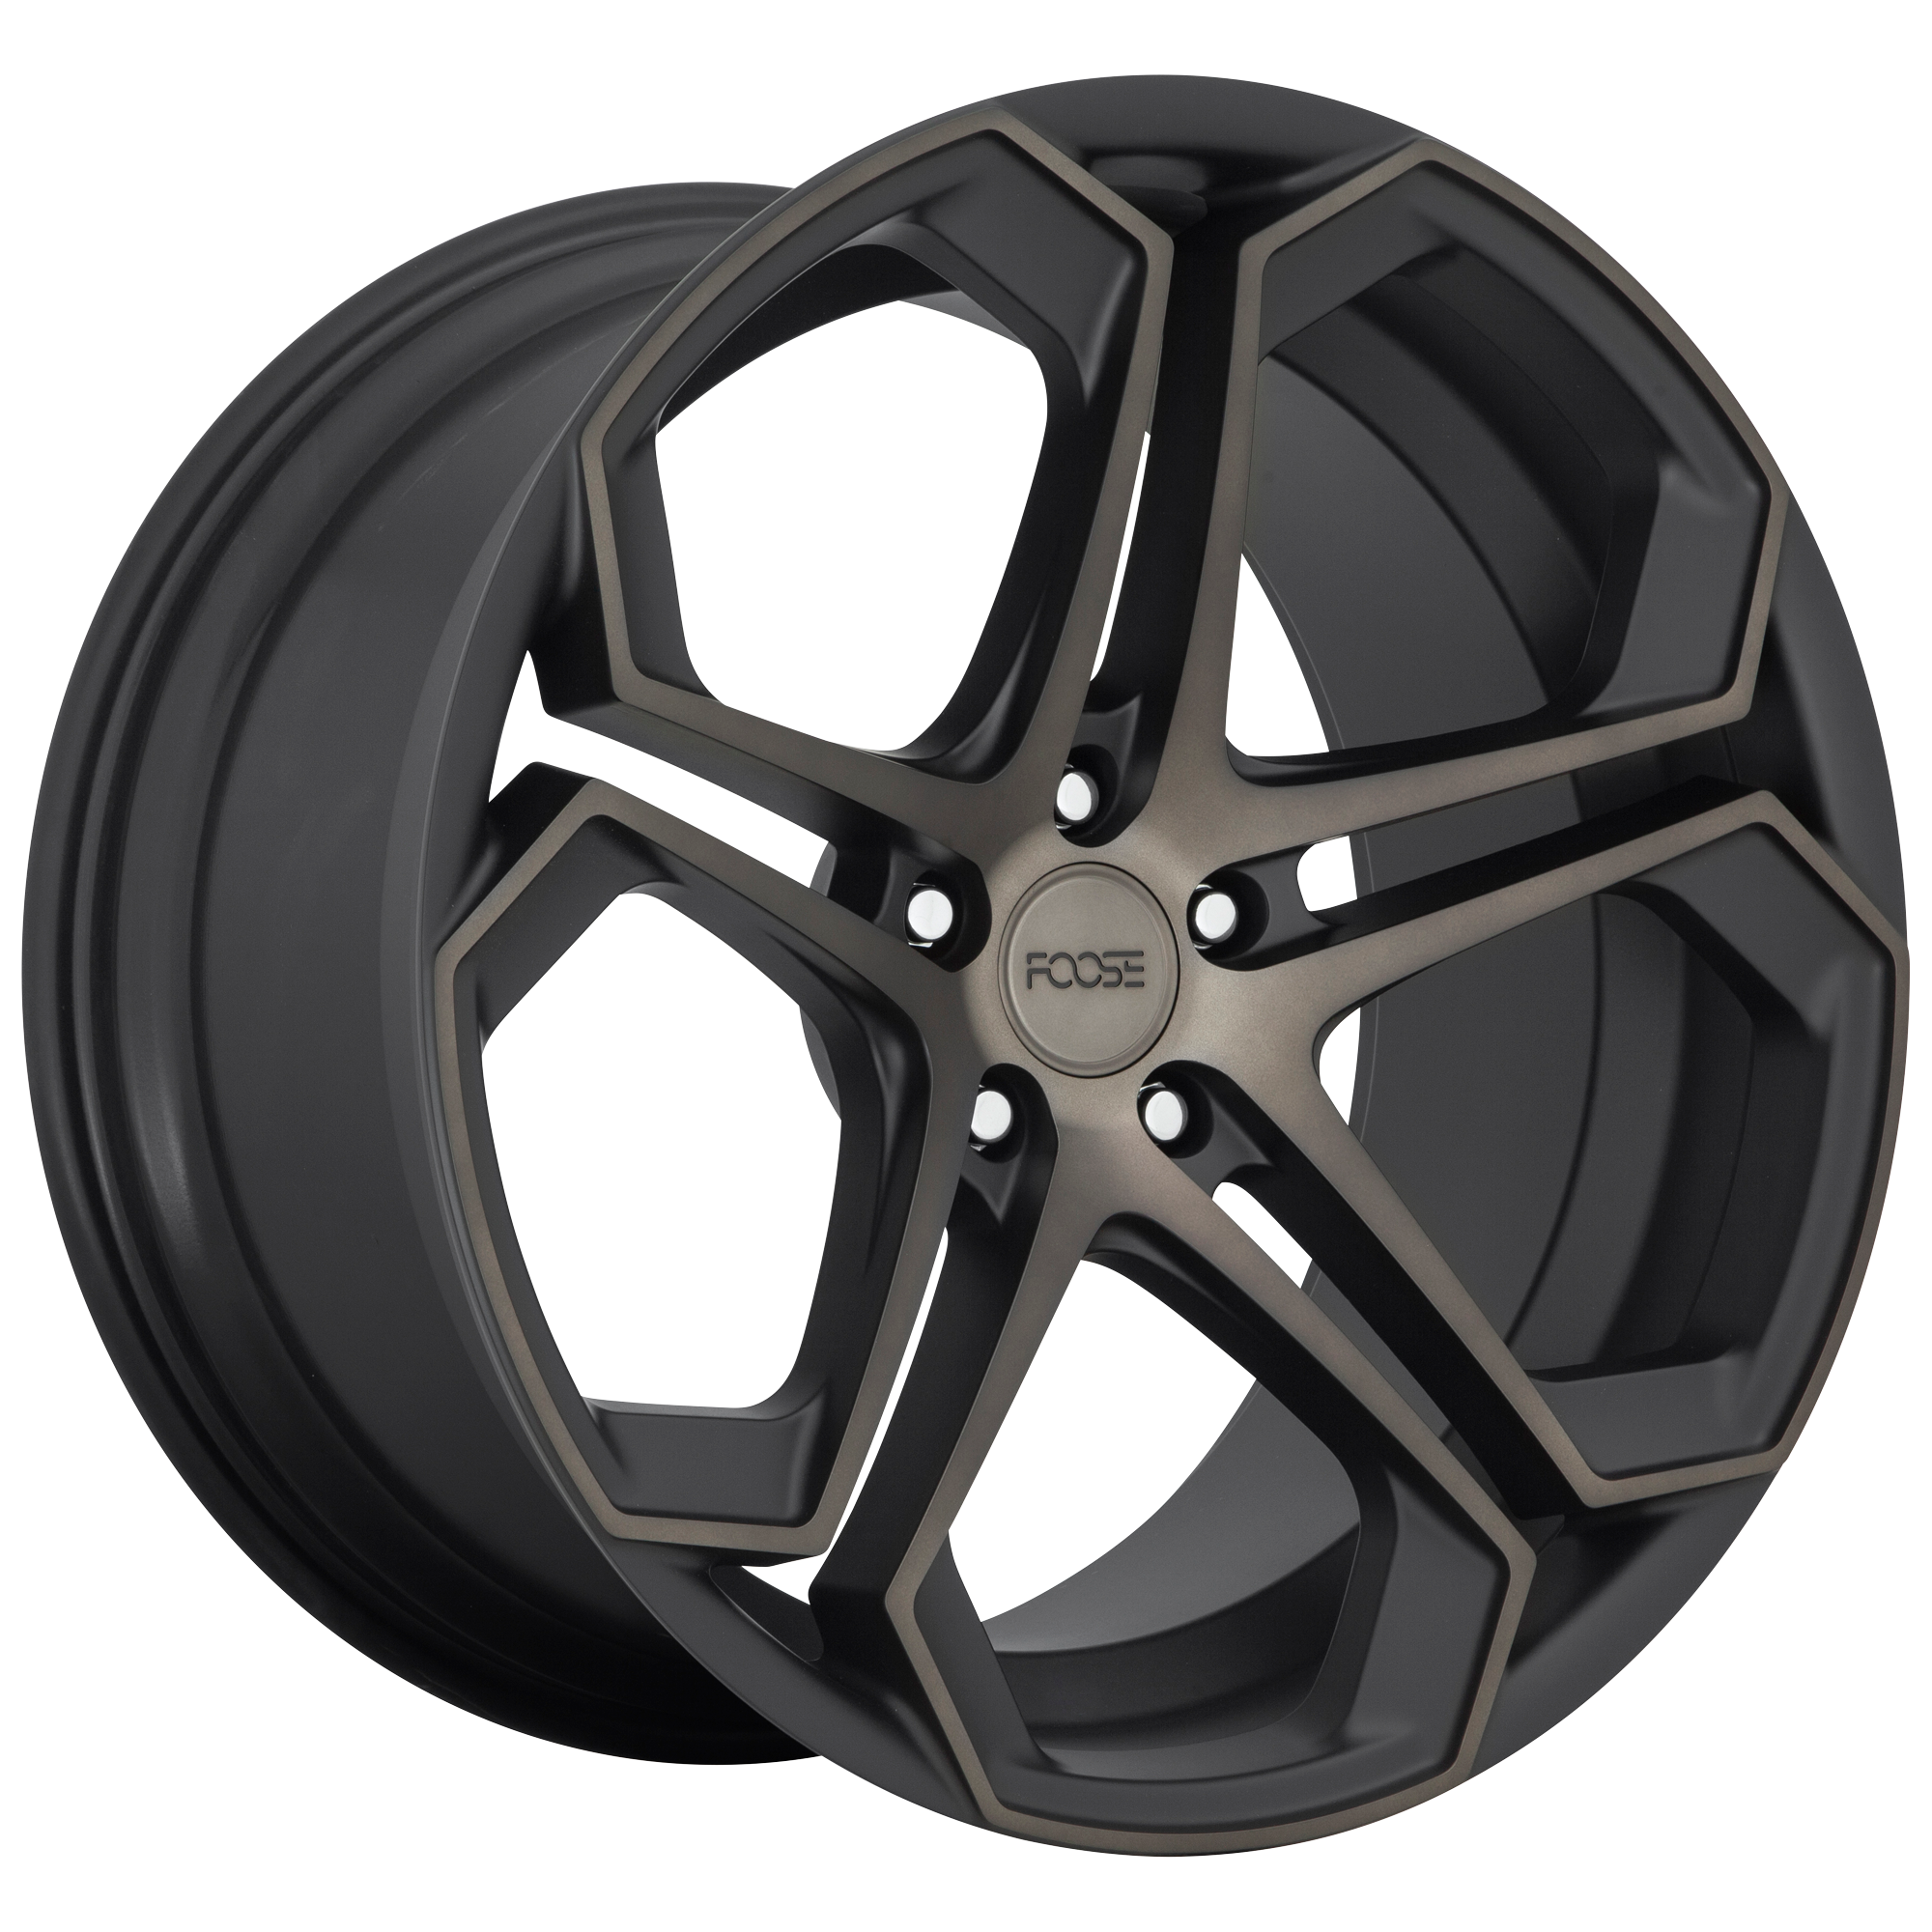 IMPALA 20x9 5x108.00 MATTE MACHINED DOUBLE DARK TINT (38 mm) - Tires and Engine Performance